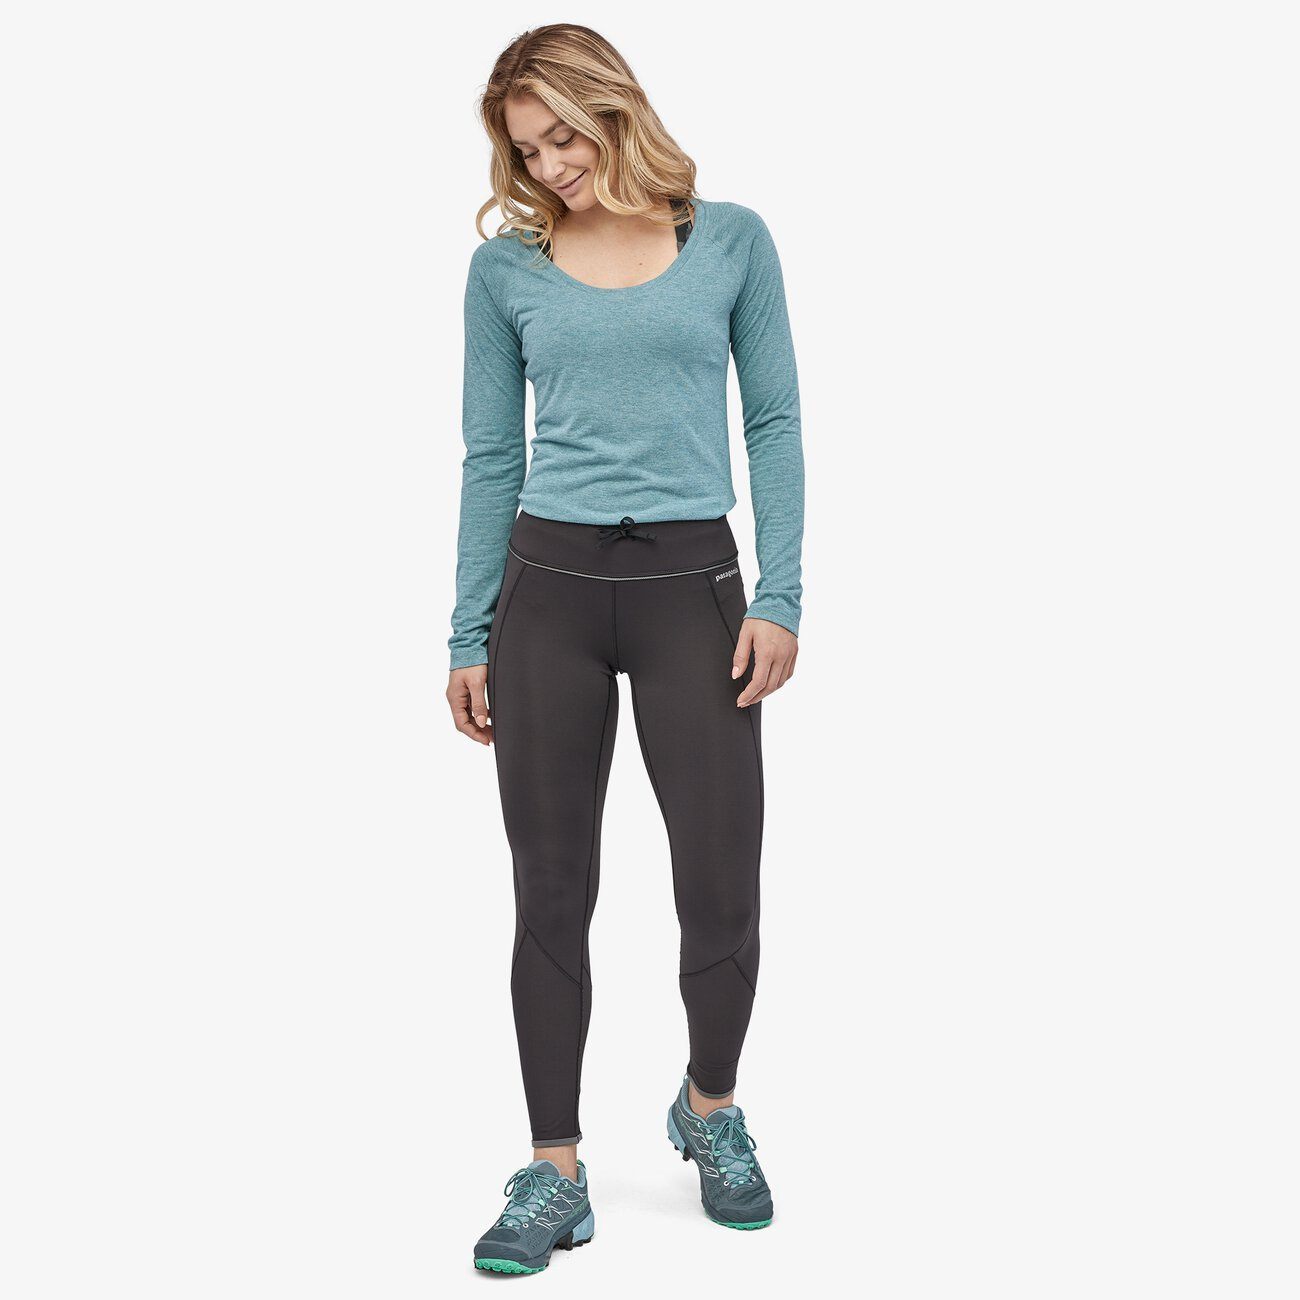 W's Peak Mission Running Tights - Recycled Polyester